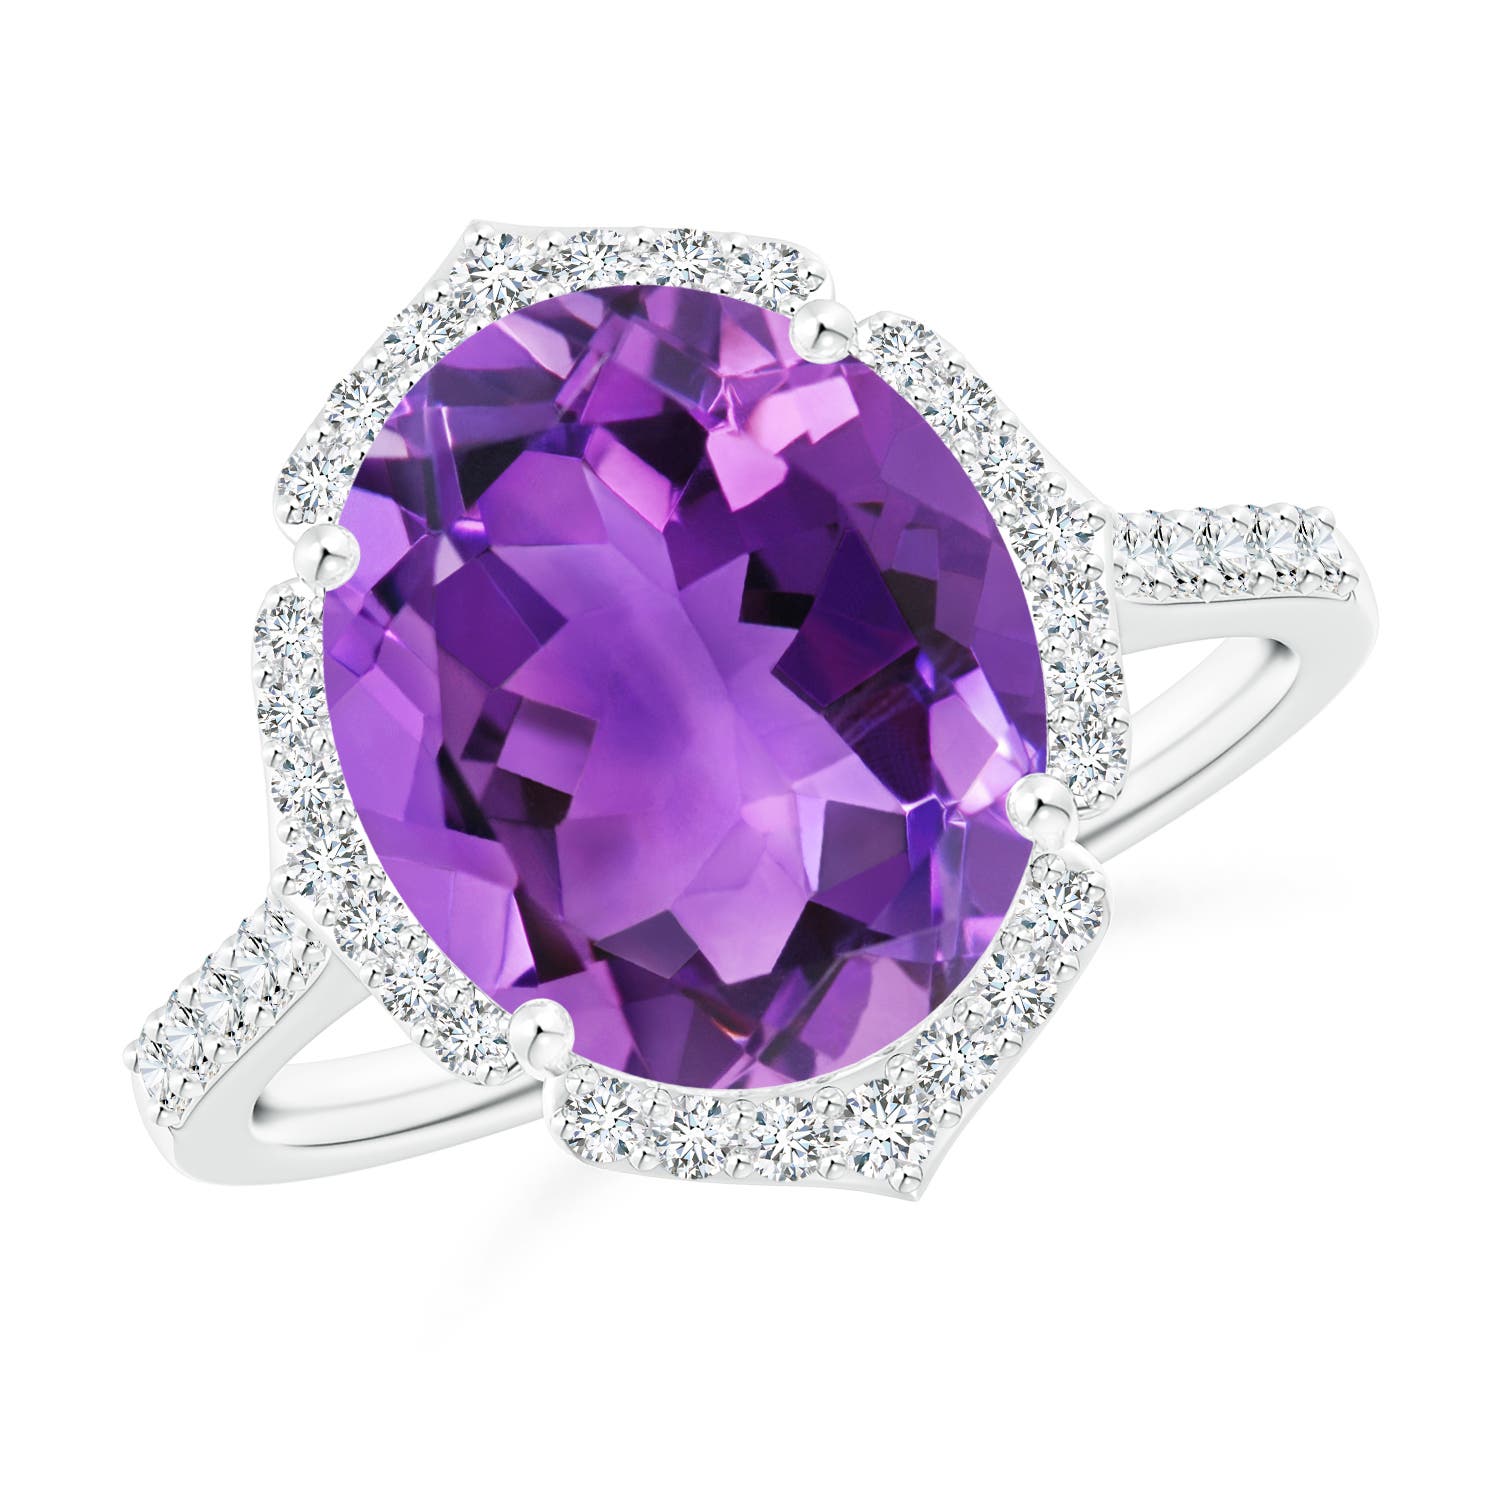 AAA - Amethyst / 4.59 CT / 14 KT White Gold